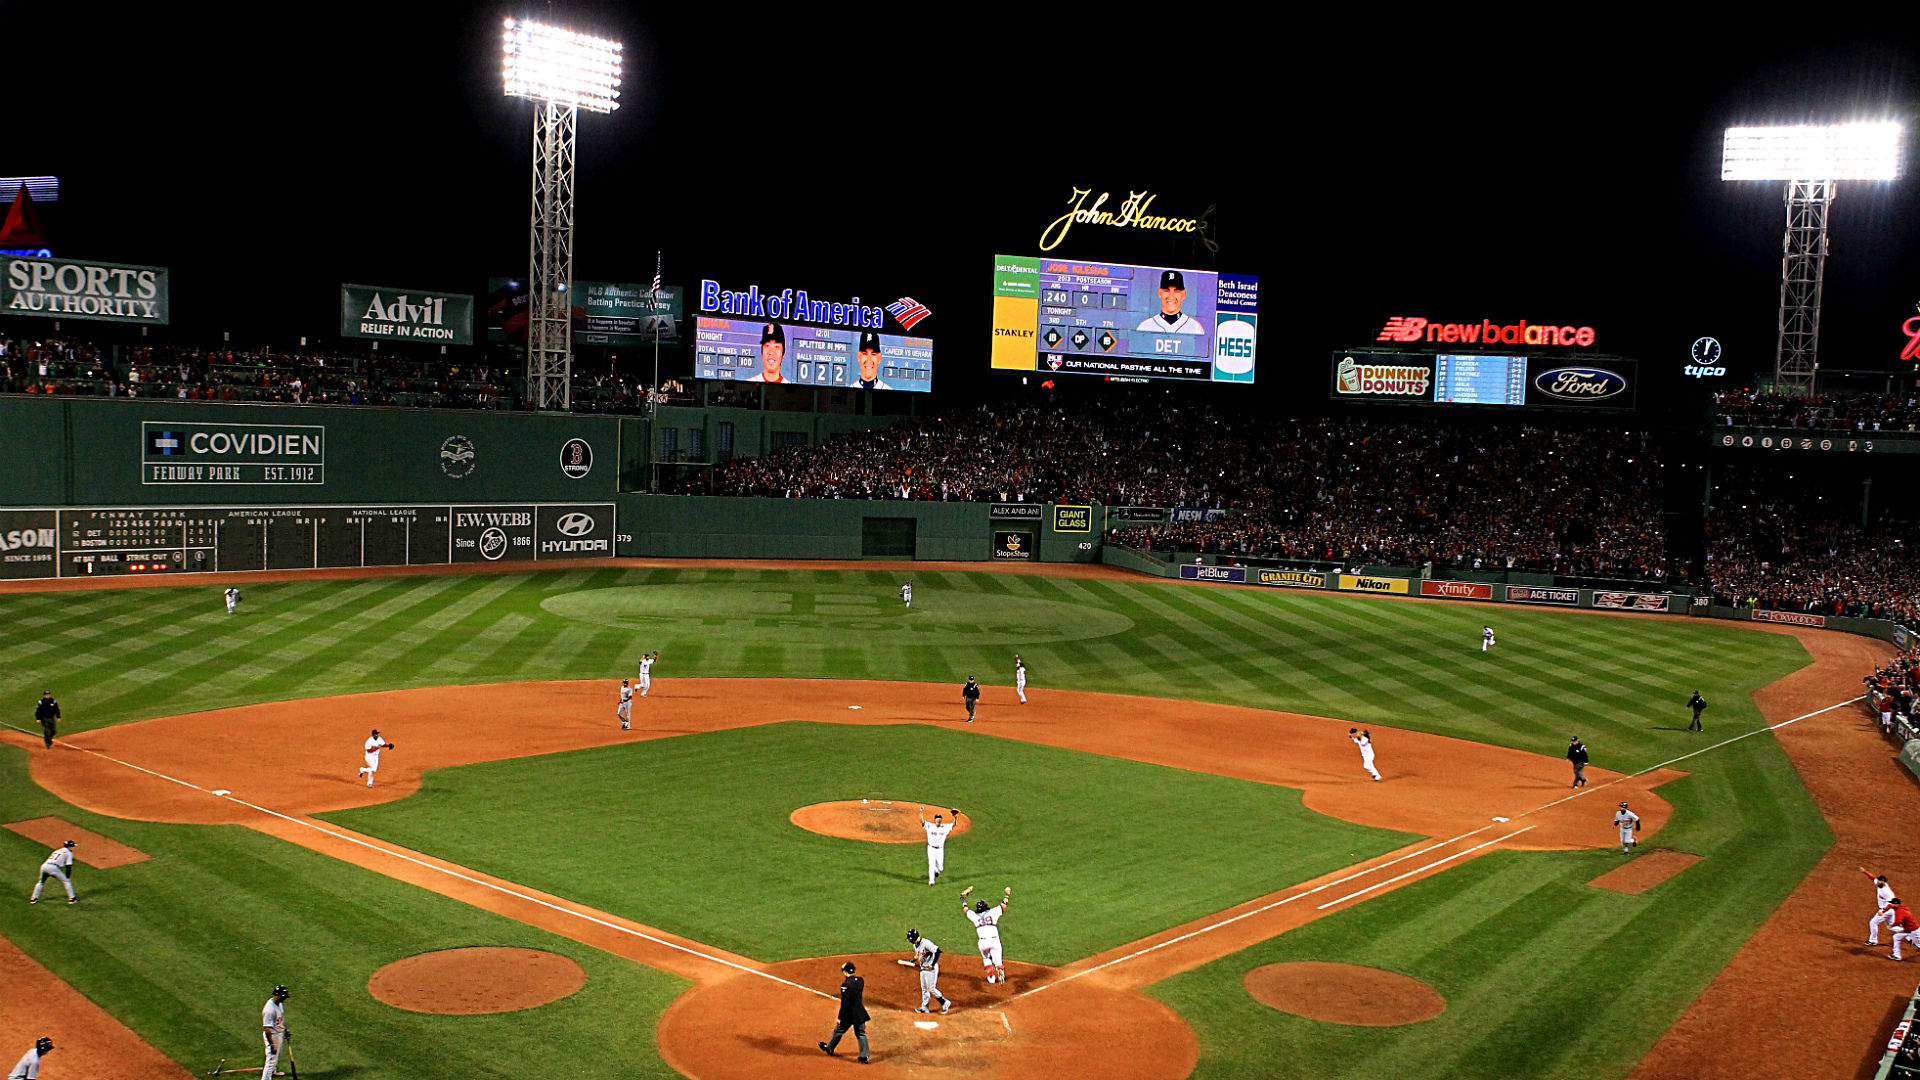 Fenway Park bans chewing tobacco in stadium | MLB | Sporting News